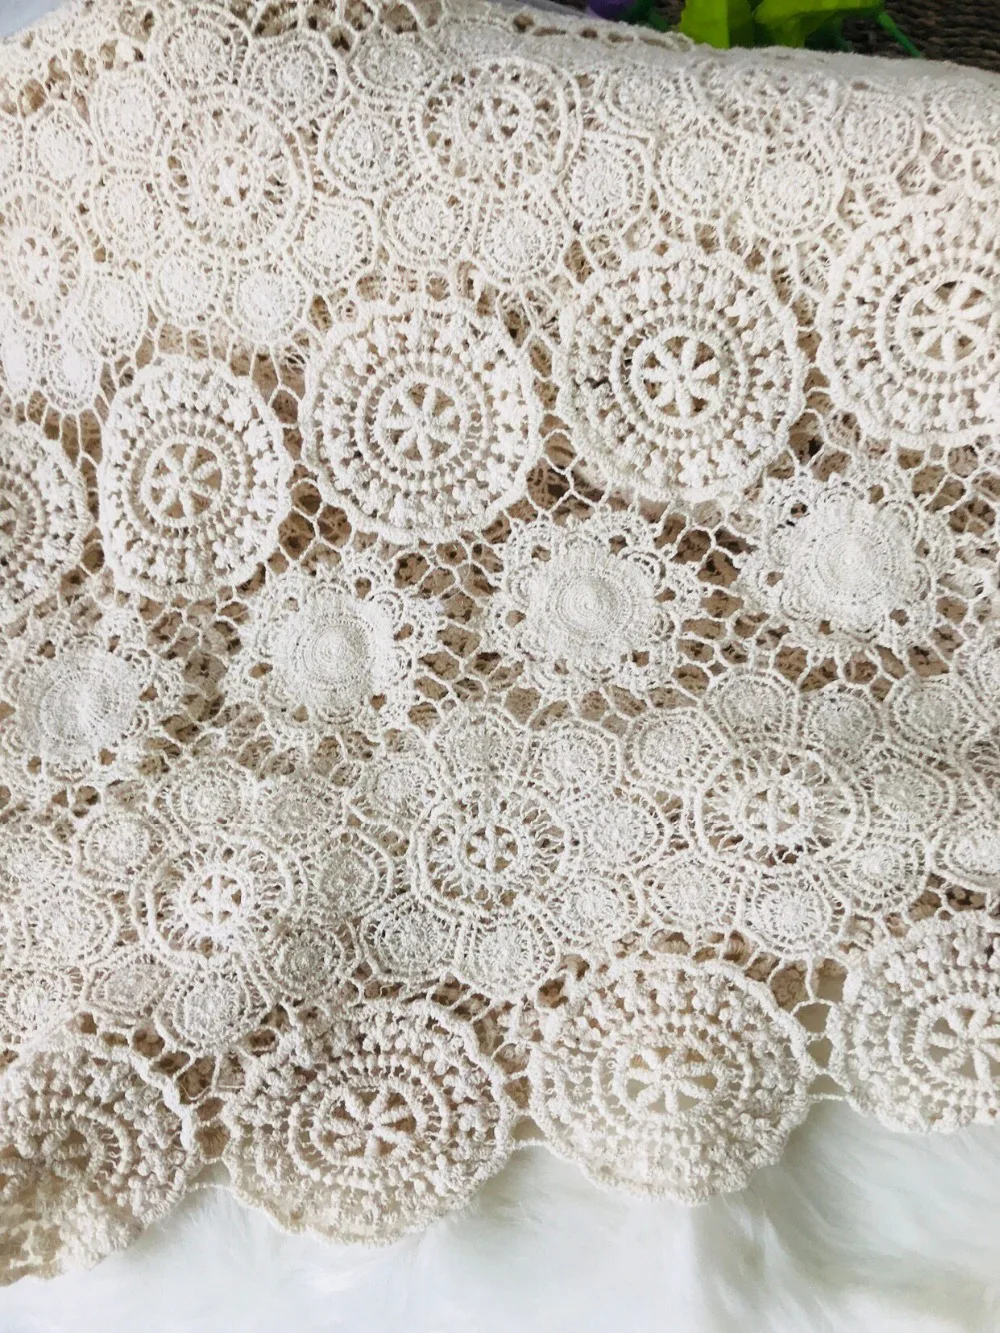 Beige Cotton Lace Fabric, Embroidered Lace Fabric, cotton fabric lace,  wedding table cloth - AliExpress